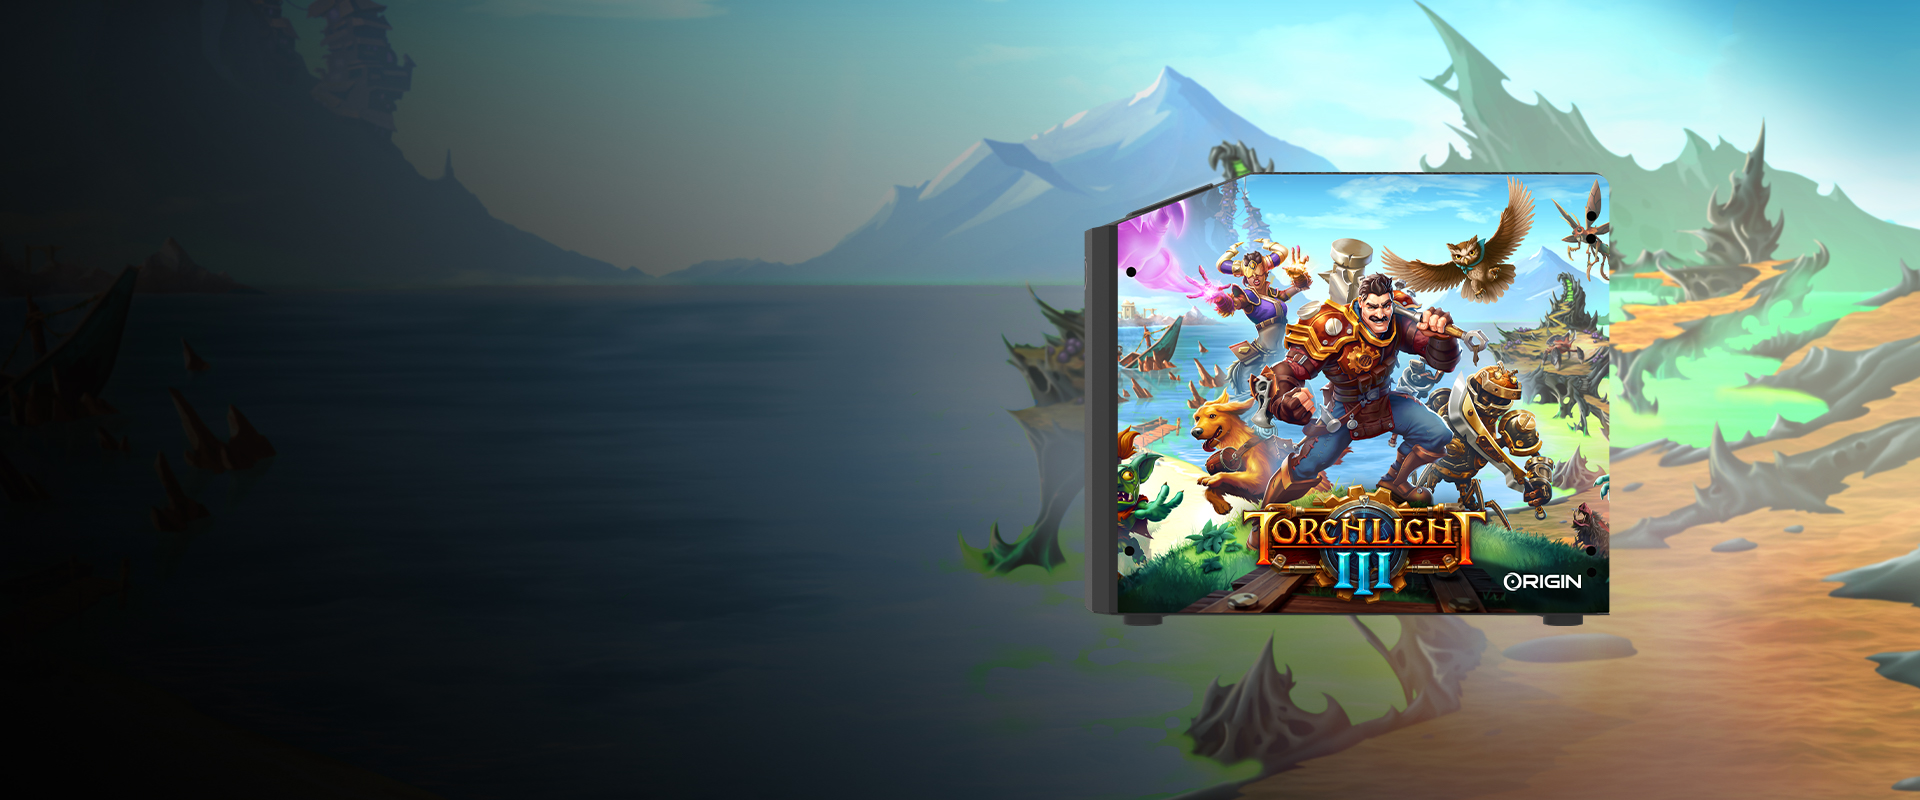 Torchlight 3 Giveaway